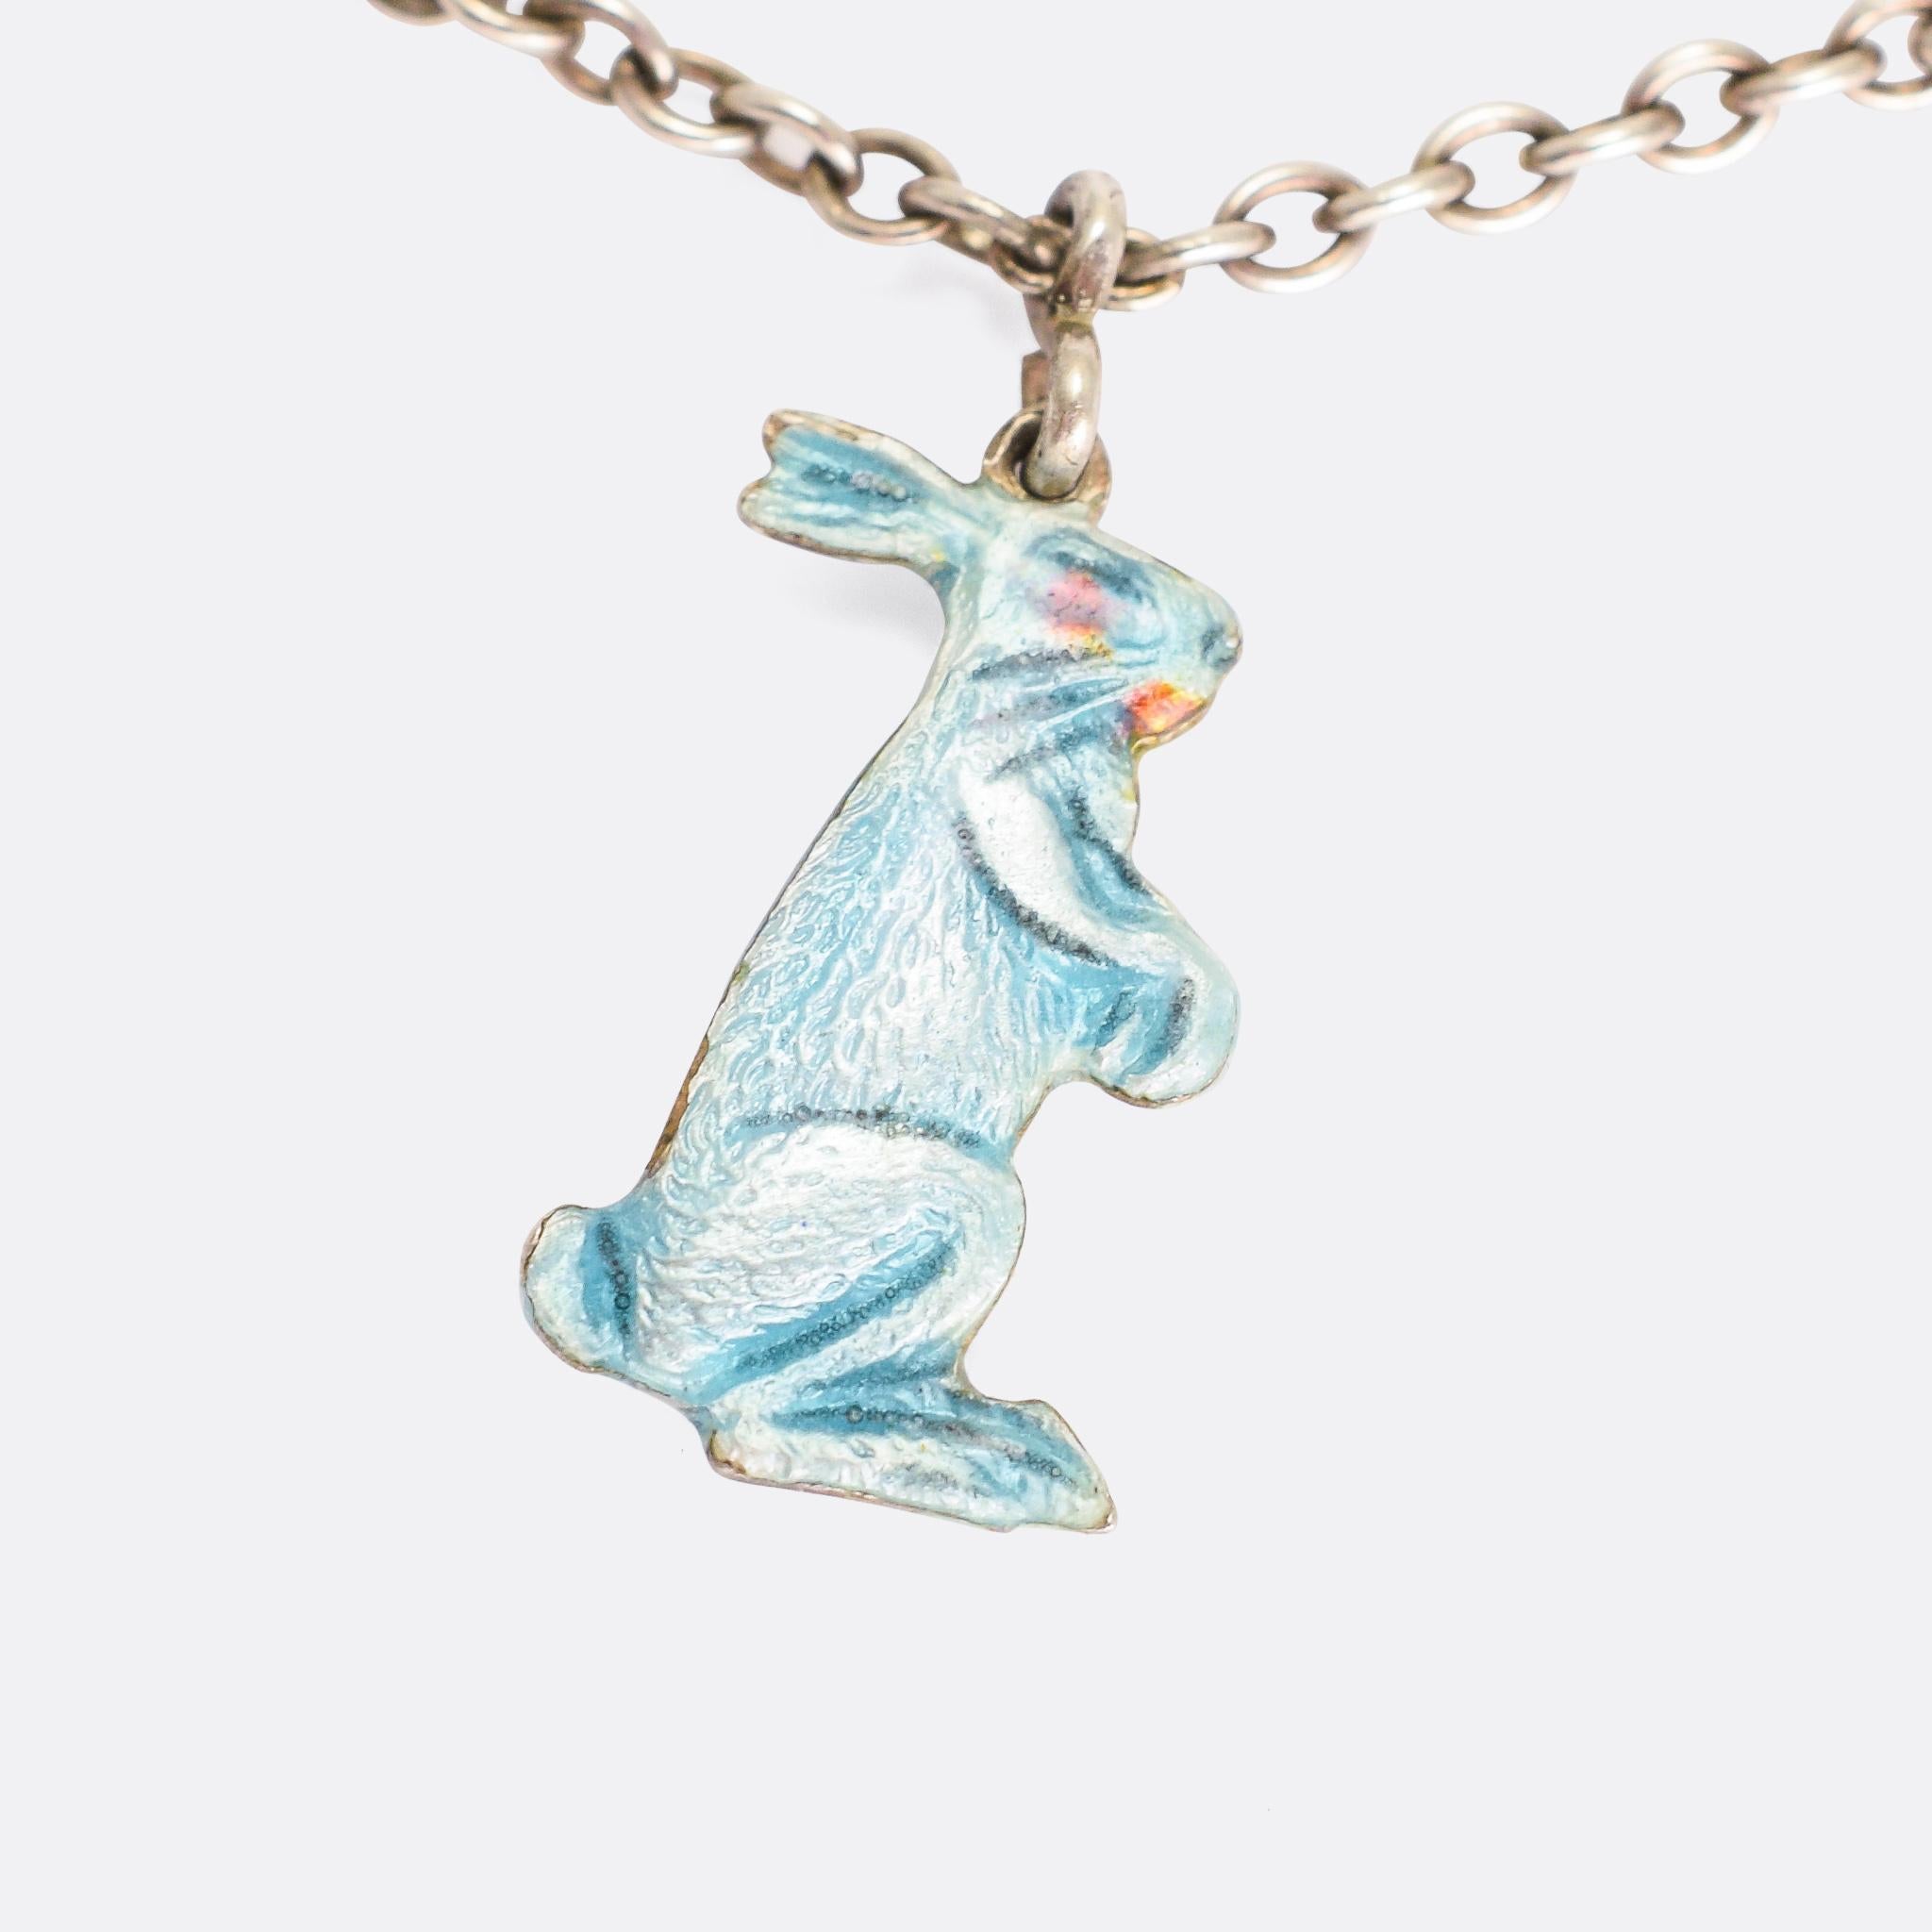 A sweet vintage charm bracelet dating from the 1930s. It features an elepahant, a polar bear, and a hare – each one with textured fur / skin and finished in light blue enamel. It’s a lovely piece, fashioned in sterling silver.

MEASUREMENTS
Wearable